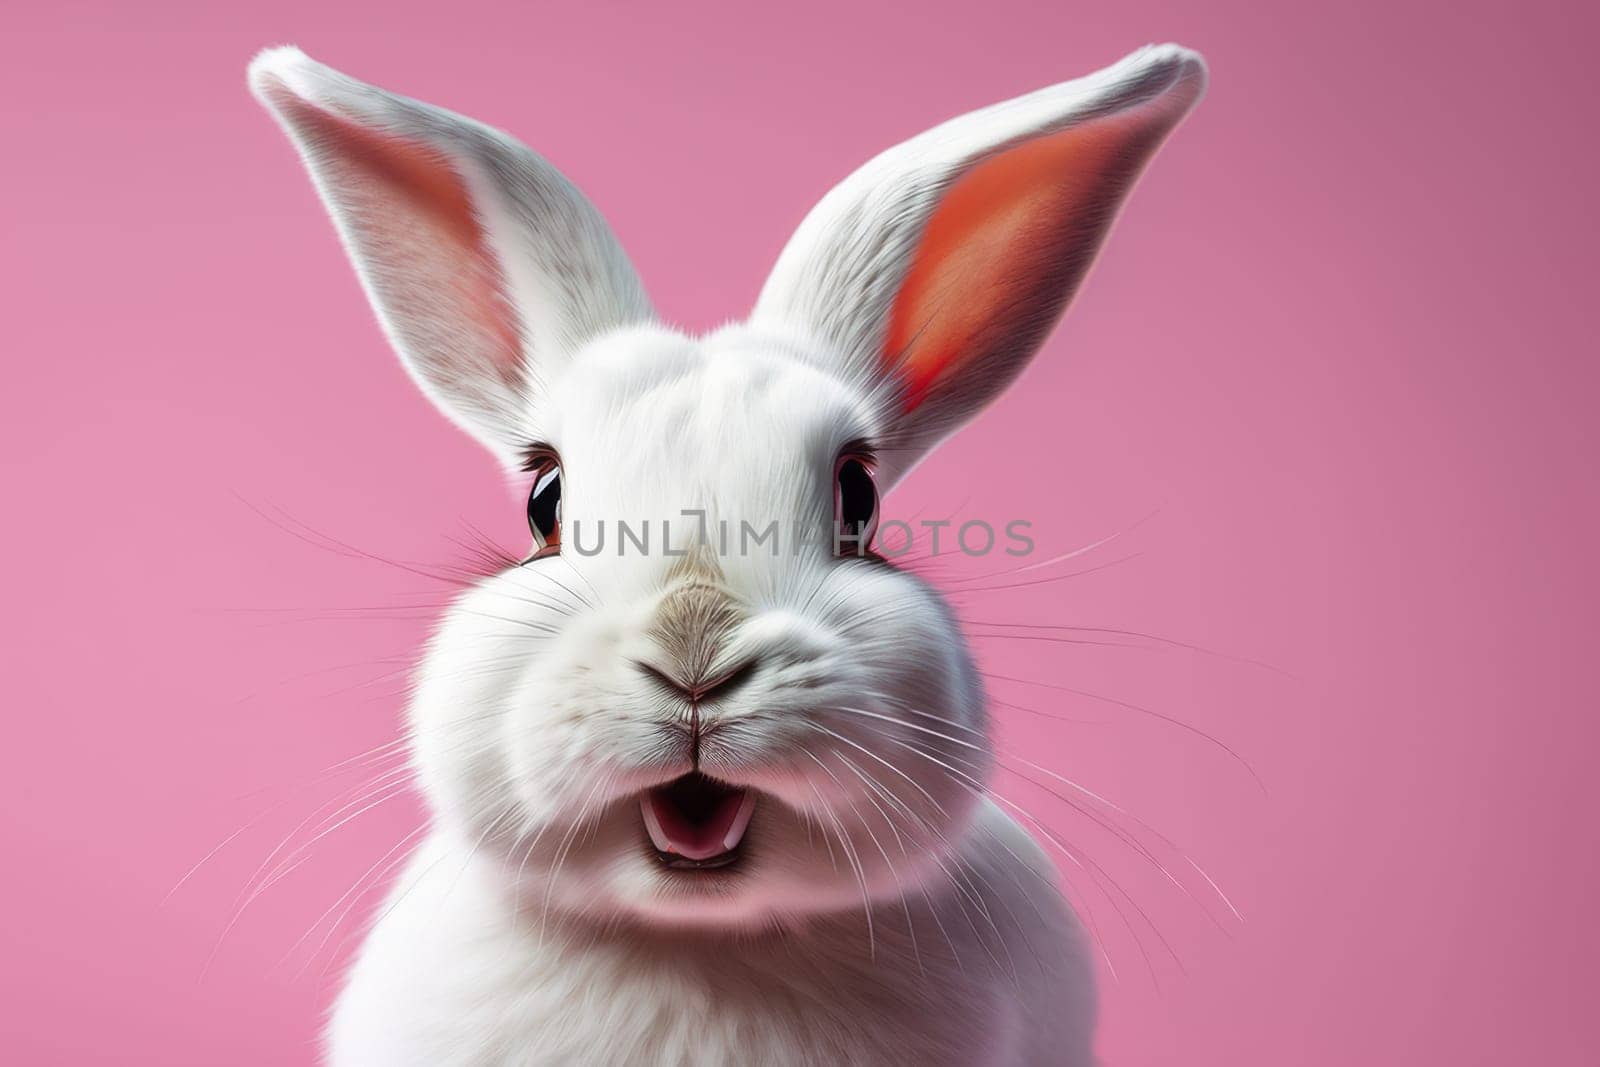 Front view of a white cute bunny standing on a pink background. A remarkable act by a young rabbit